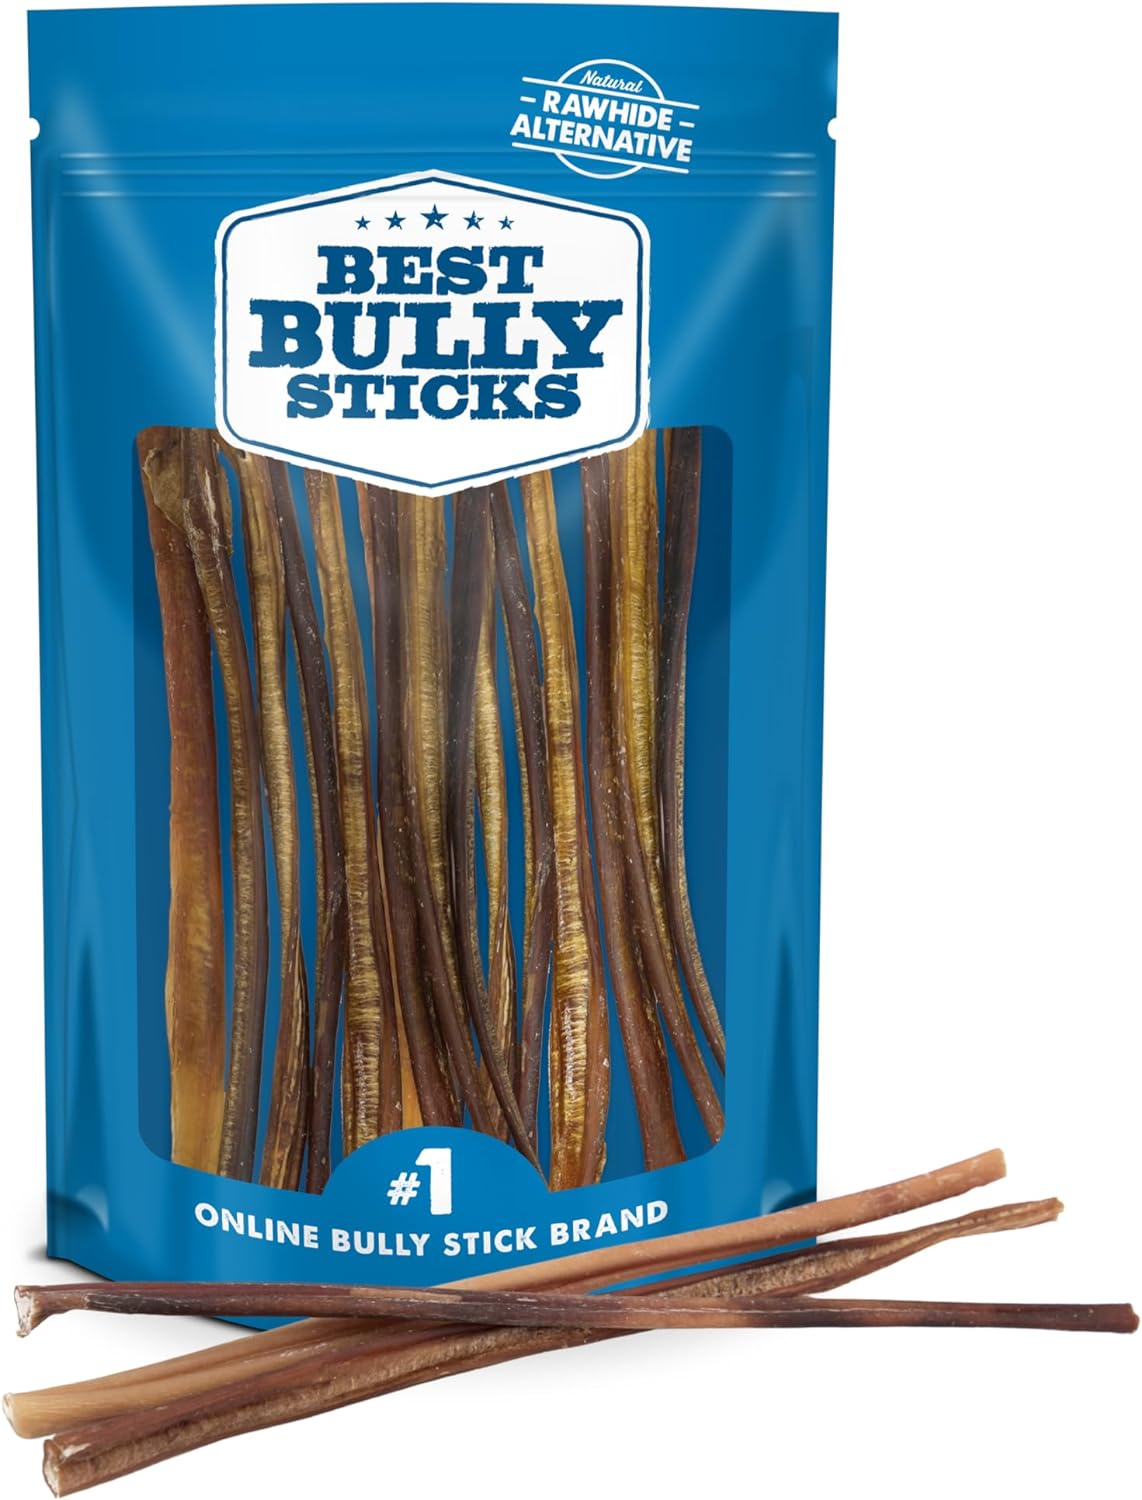 Best Bully Sticks 12 Inch All-Natural Bully Sticks for Dogs - 12” Fully Digestible, 100% Grass-Fed Beef, Grain and Rawhide Free | 12 Pack